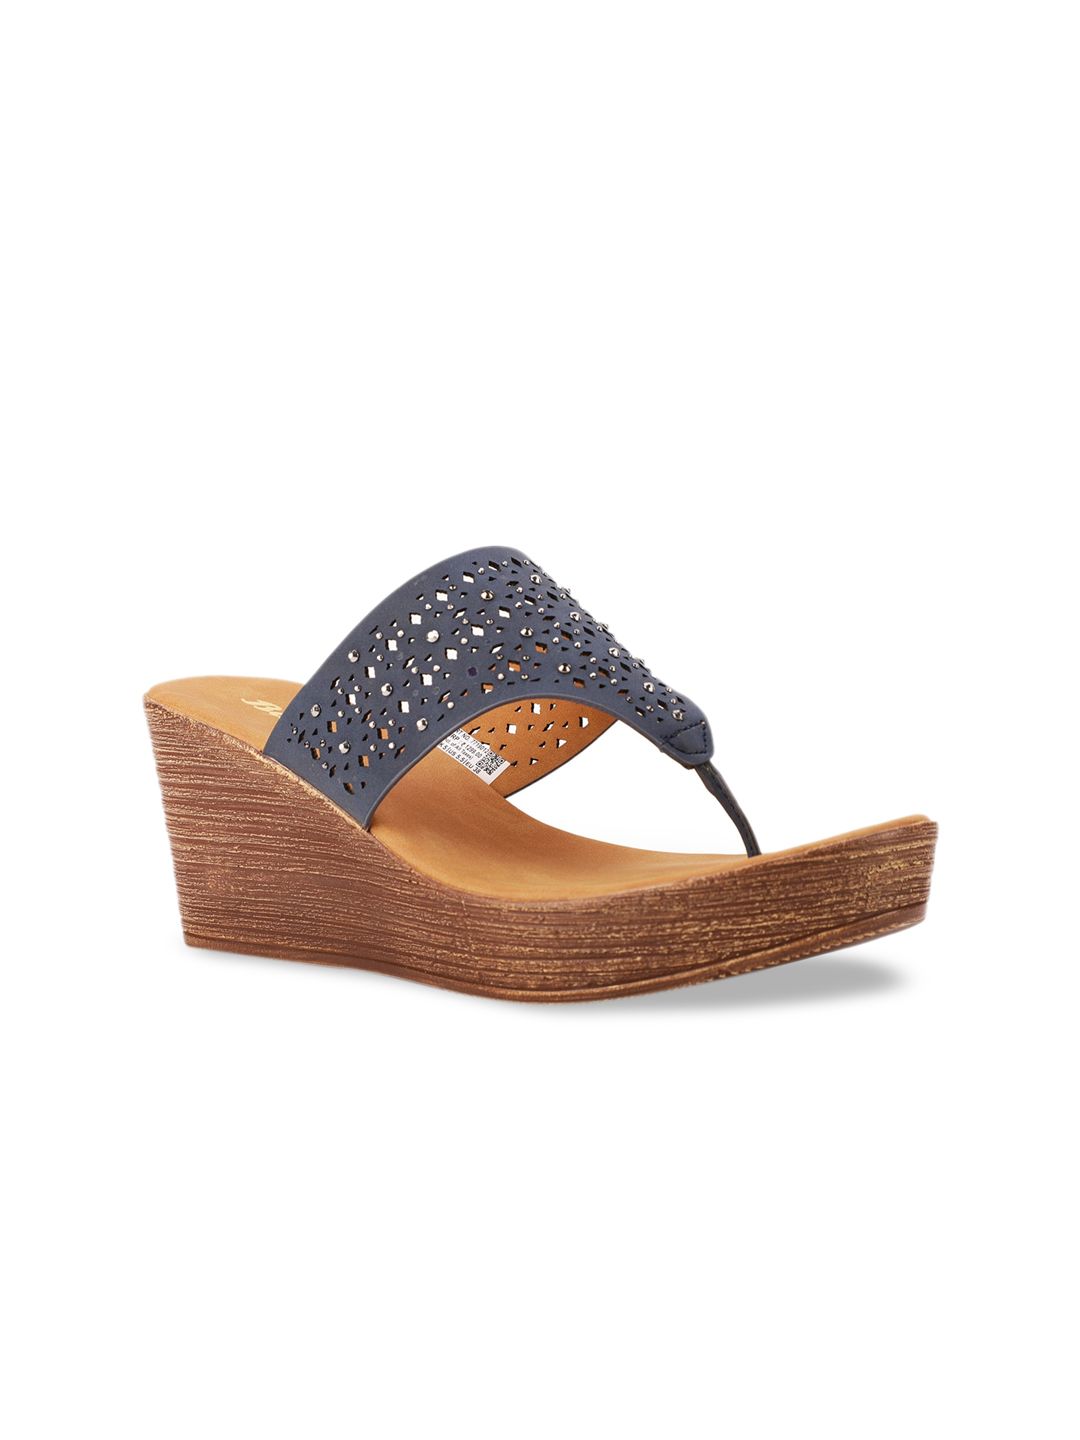 Bata Blue Wedge Sandals With Laser Cuts Price in India